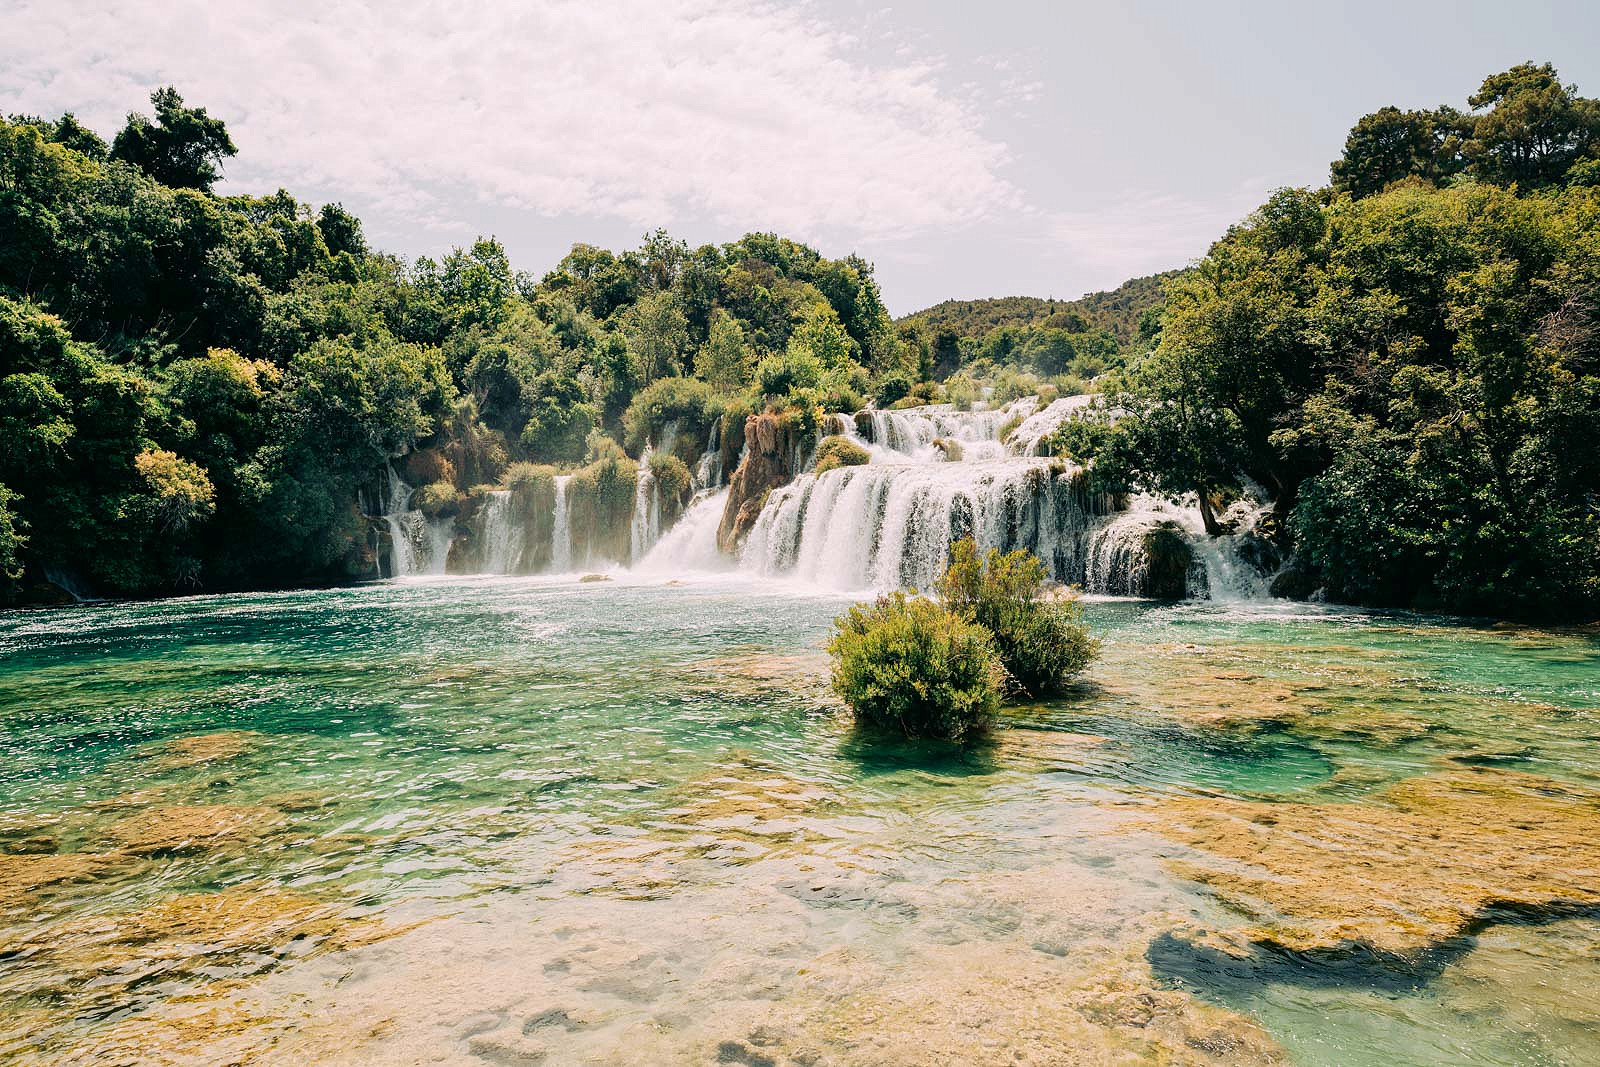 Guide to Krka National Park - Places You Cannot Miss and a Waterfall Restaurant